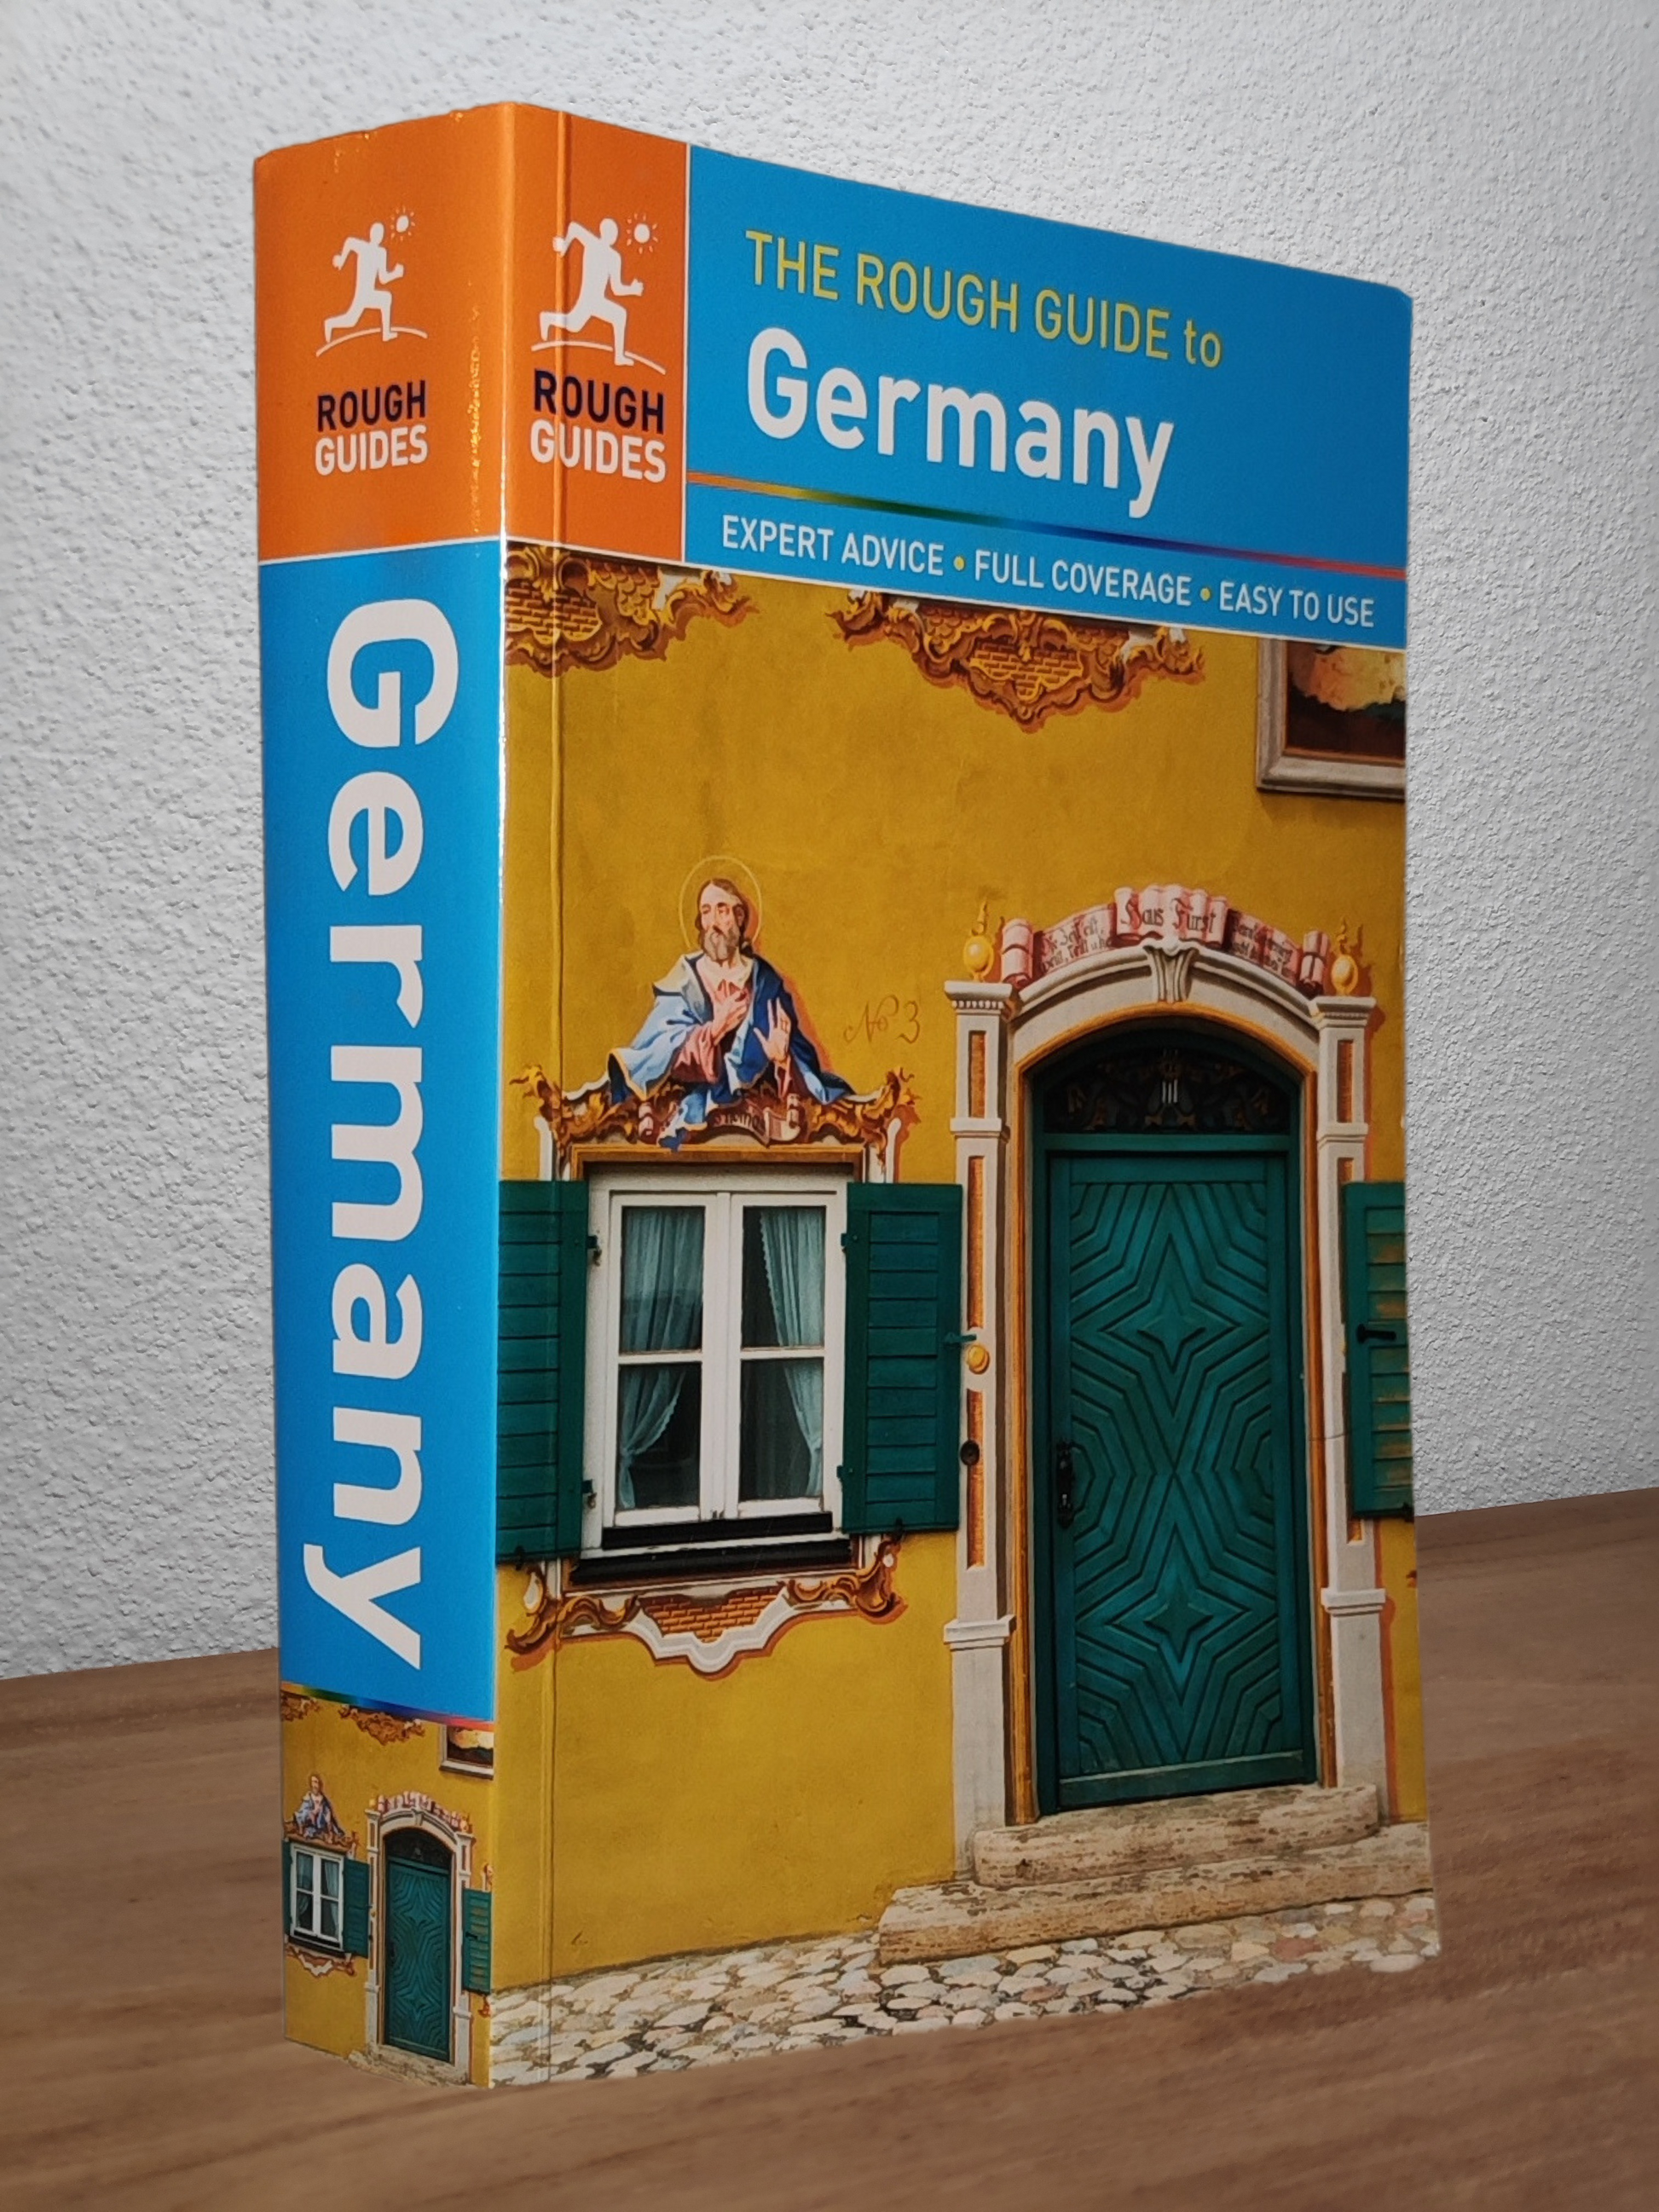 Rough Guide - Germany  - Second-hand english book to deliver in Zurich & Switzerland